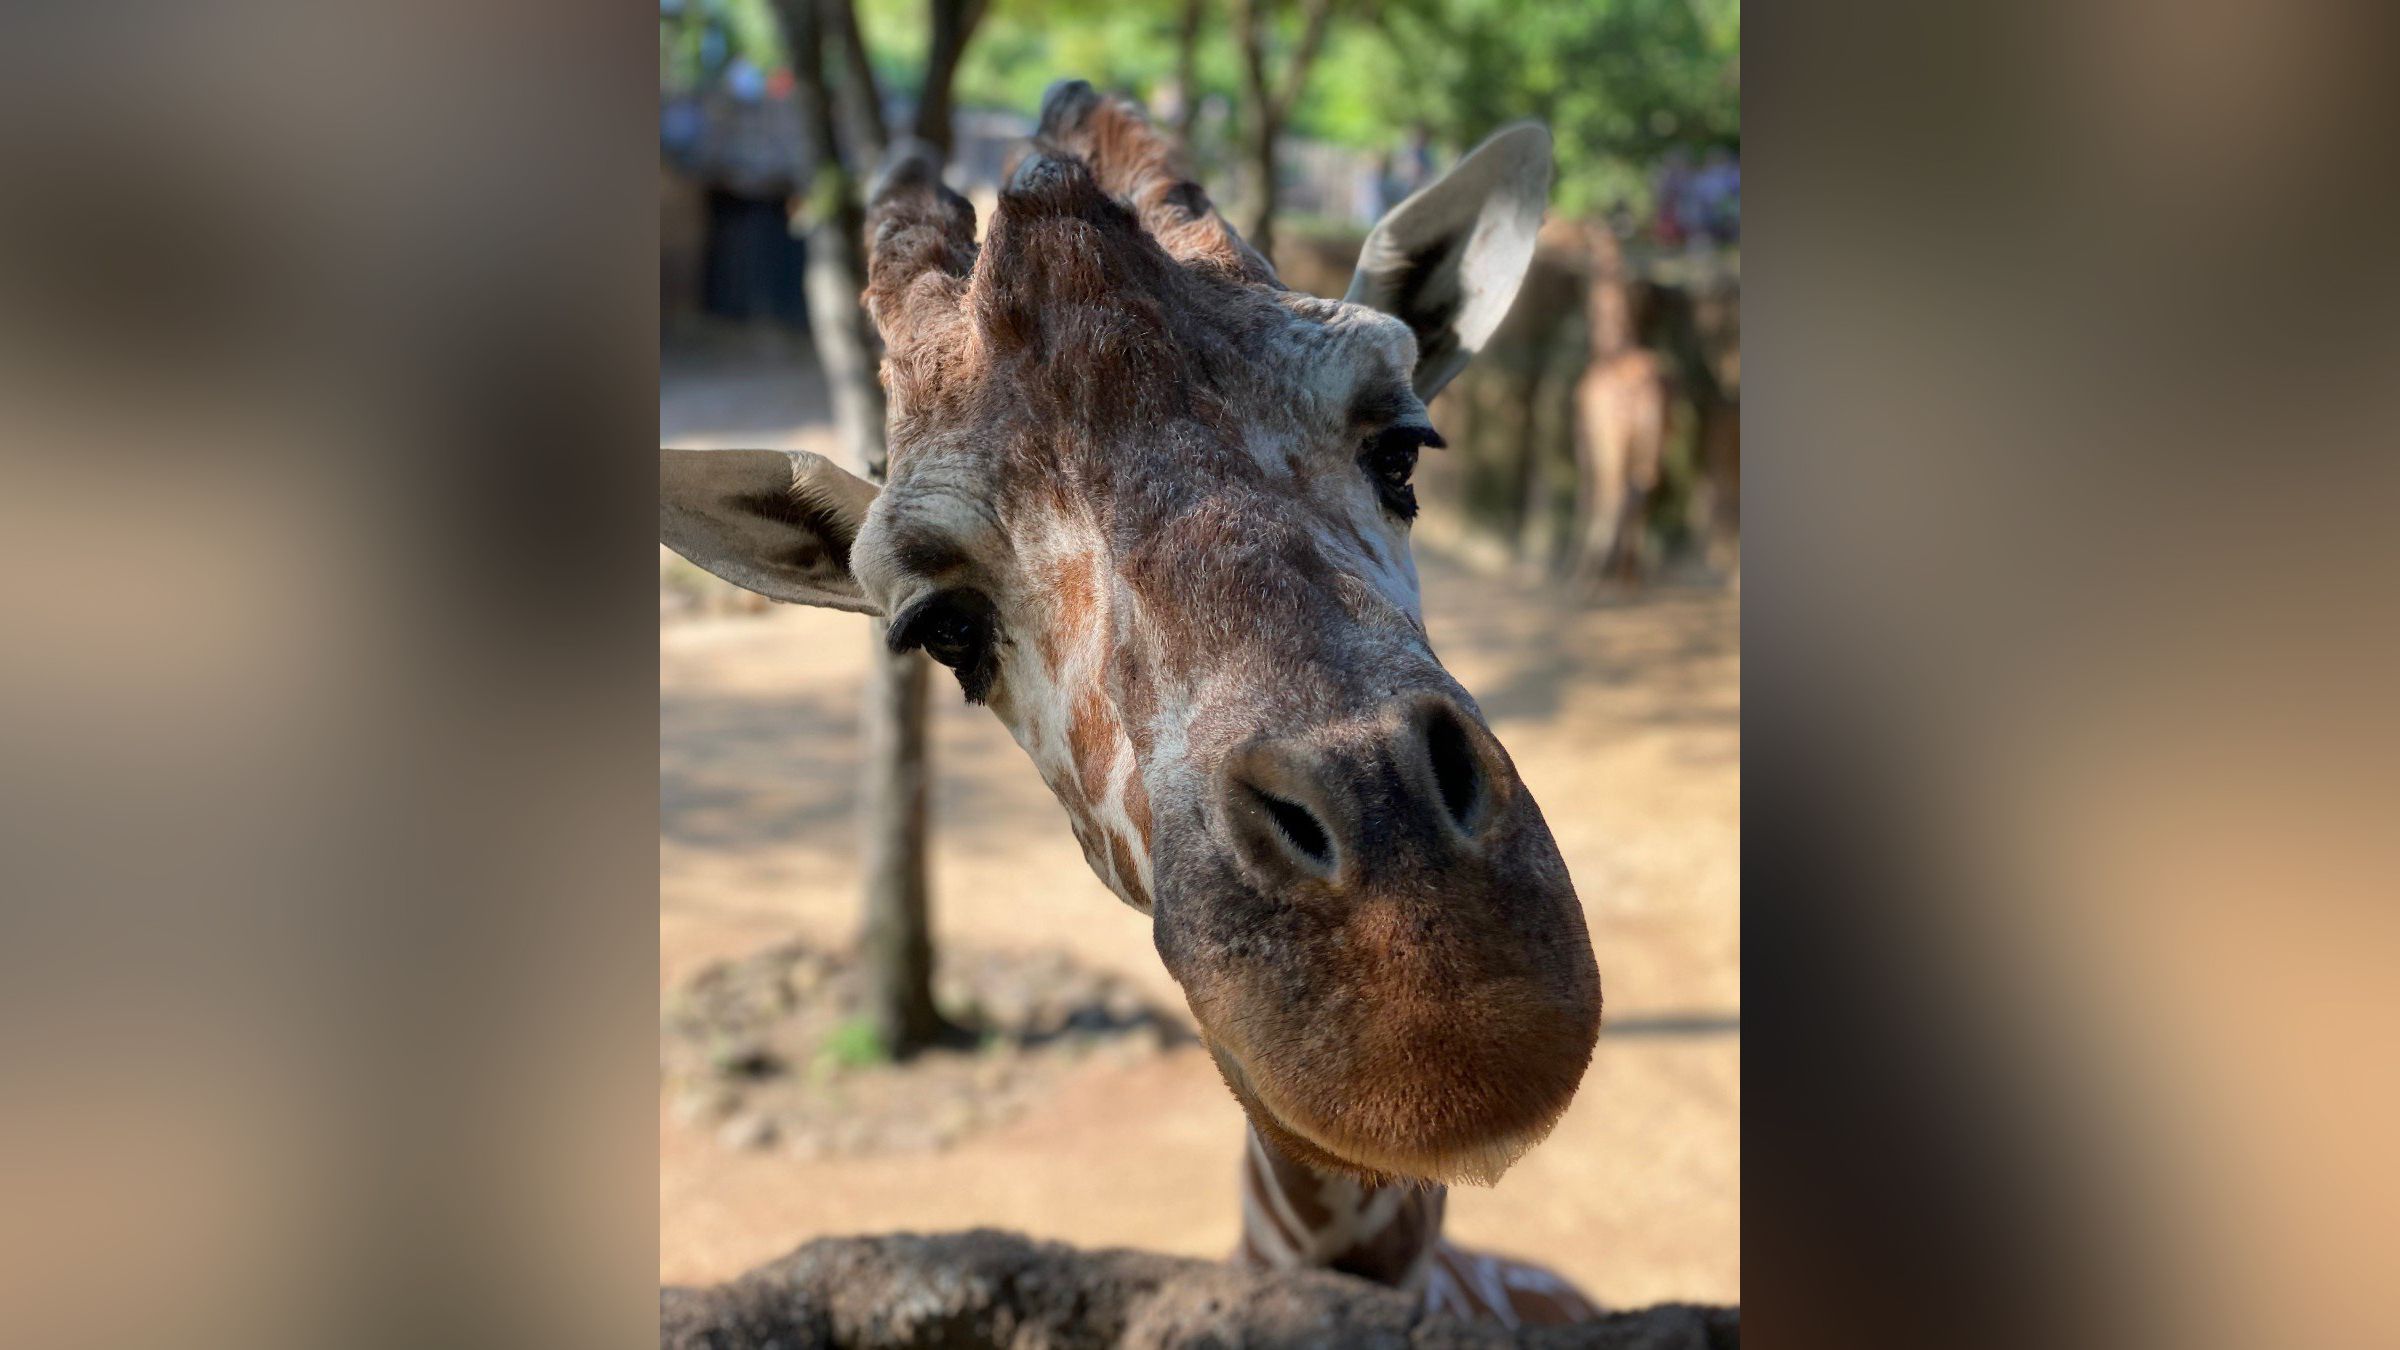 Three giraffes died at the Dallas Zoo in less than a month. Experts are  looking into whether two of the deaths are connected | CNN